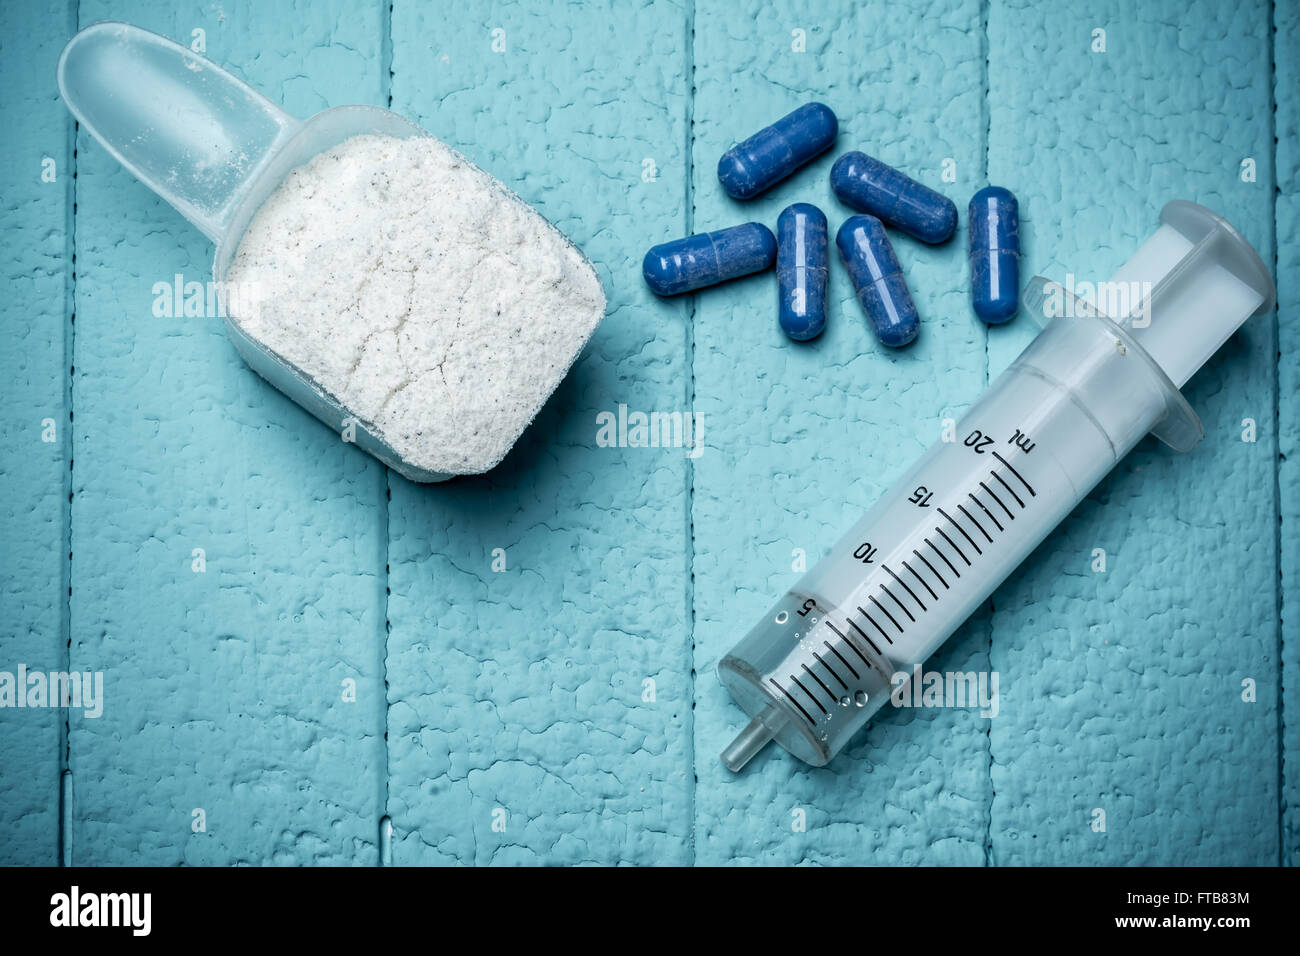 https://c8.alamy.com/comp/FTB83M/container-of-milk-whey-protein-empty-injection-and-pills-close-up-FTB83M.jpg